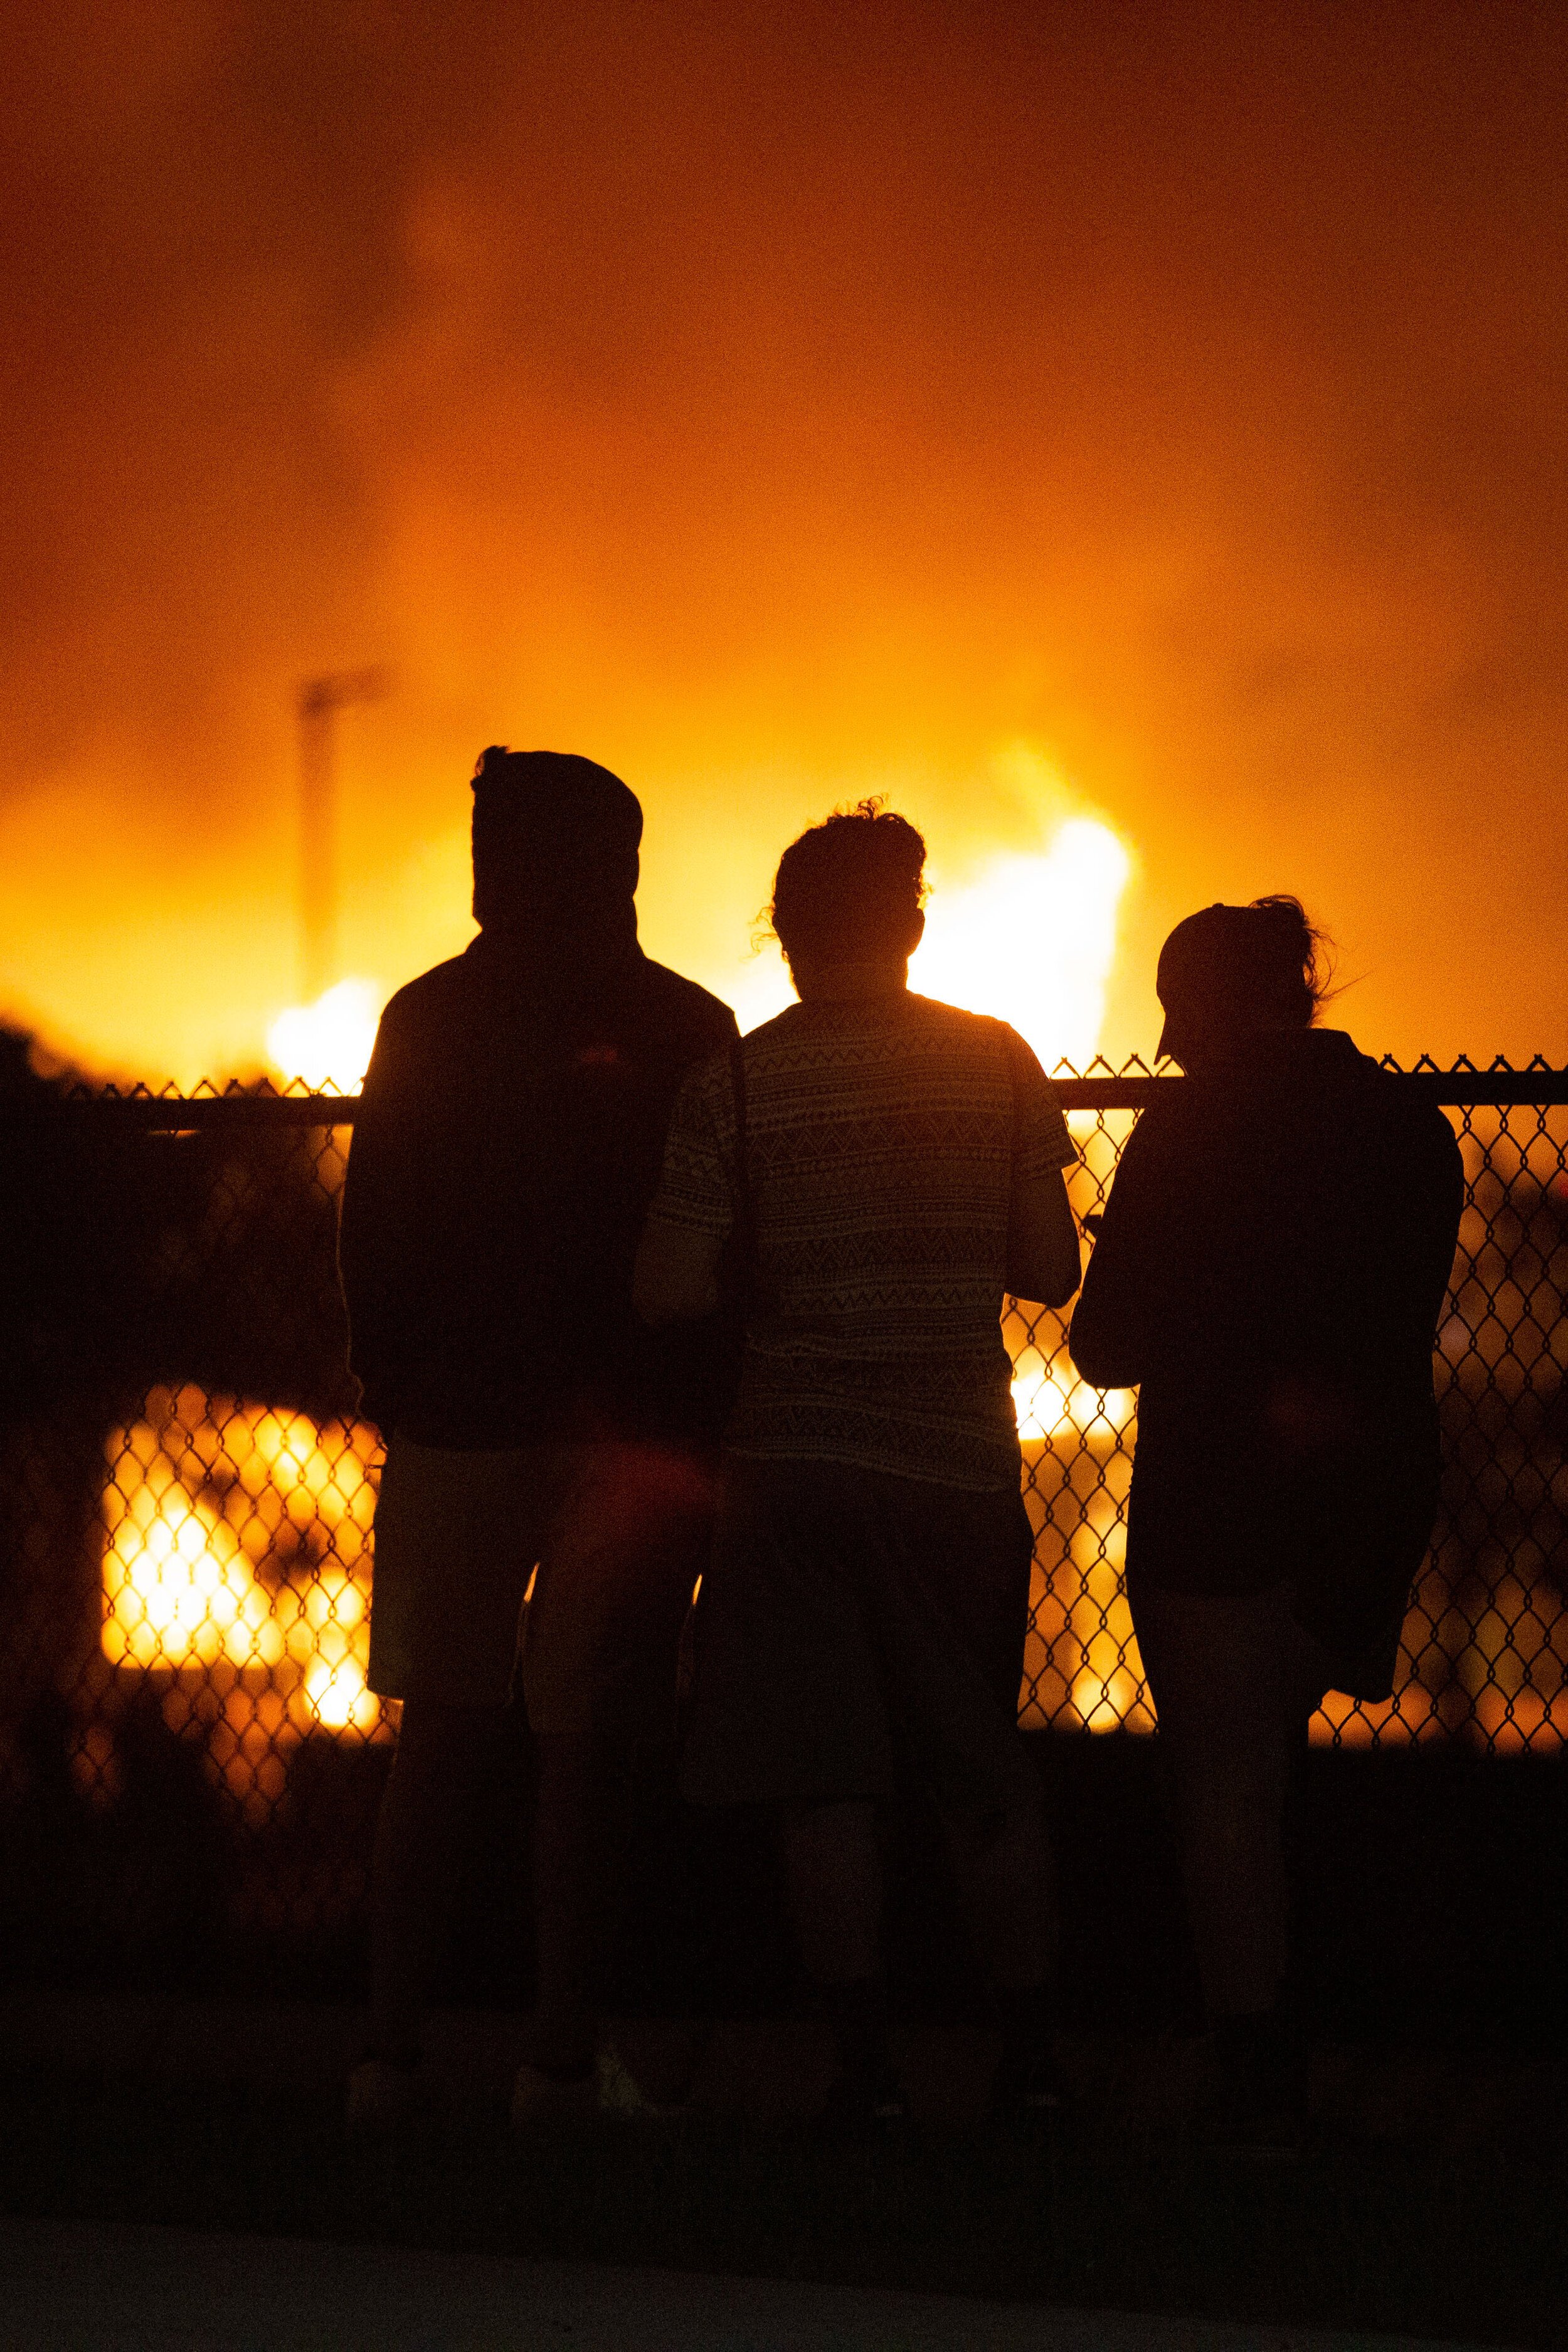  Protesters watch fires that burn which were set by protesters during riots over the police killing of George Floyd in Minneapolis, Minnesota on May 29, 2020. 